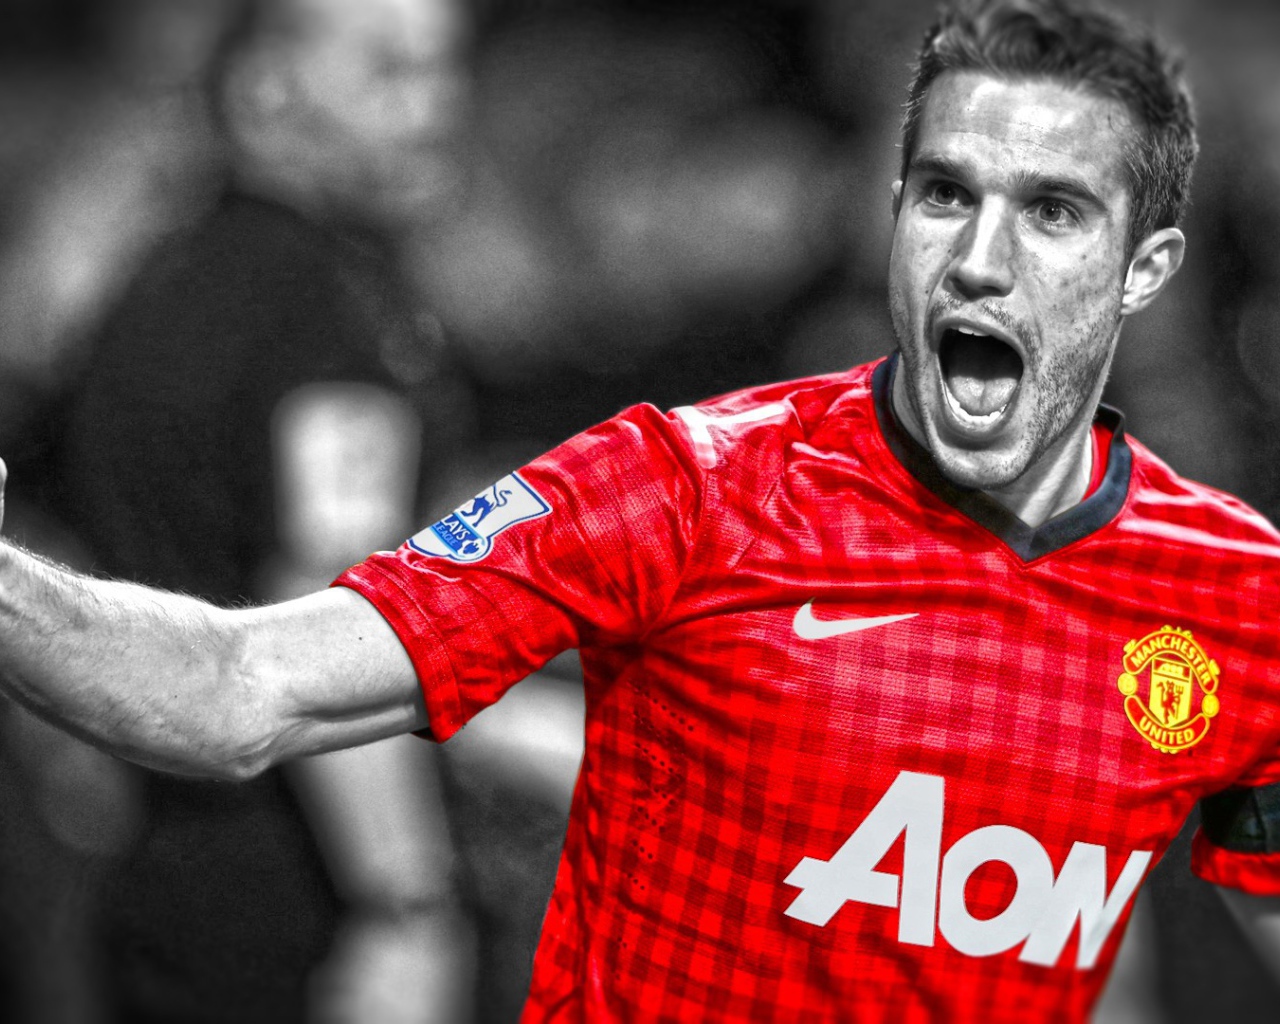 The attacker of Manchester United Robin van Persie celebrating victory